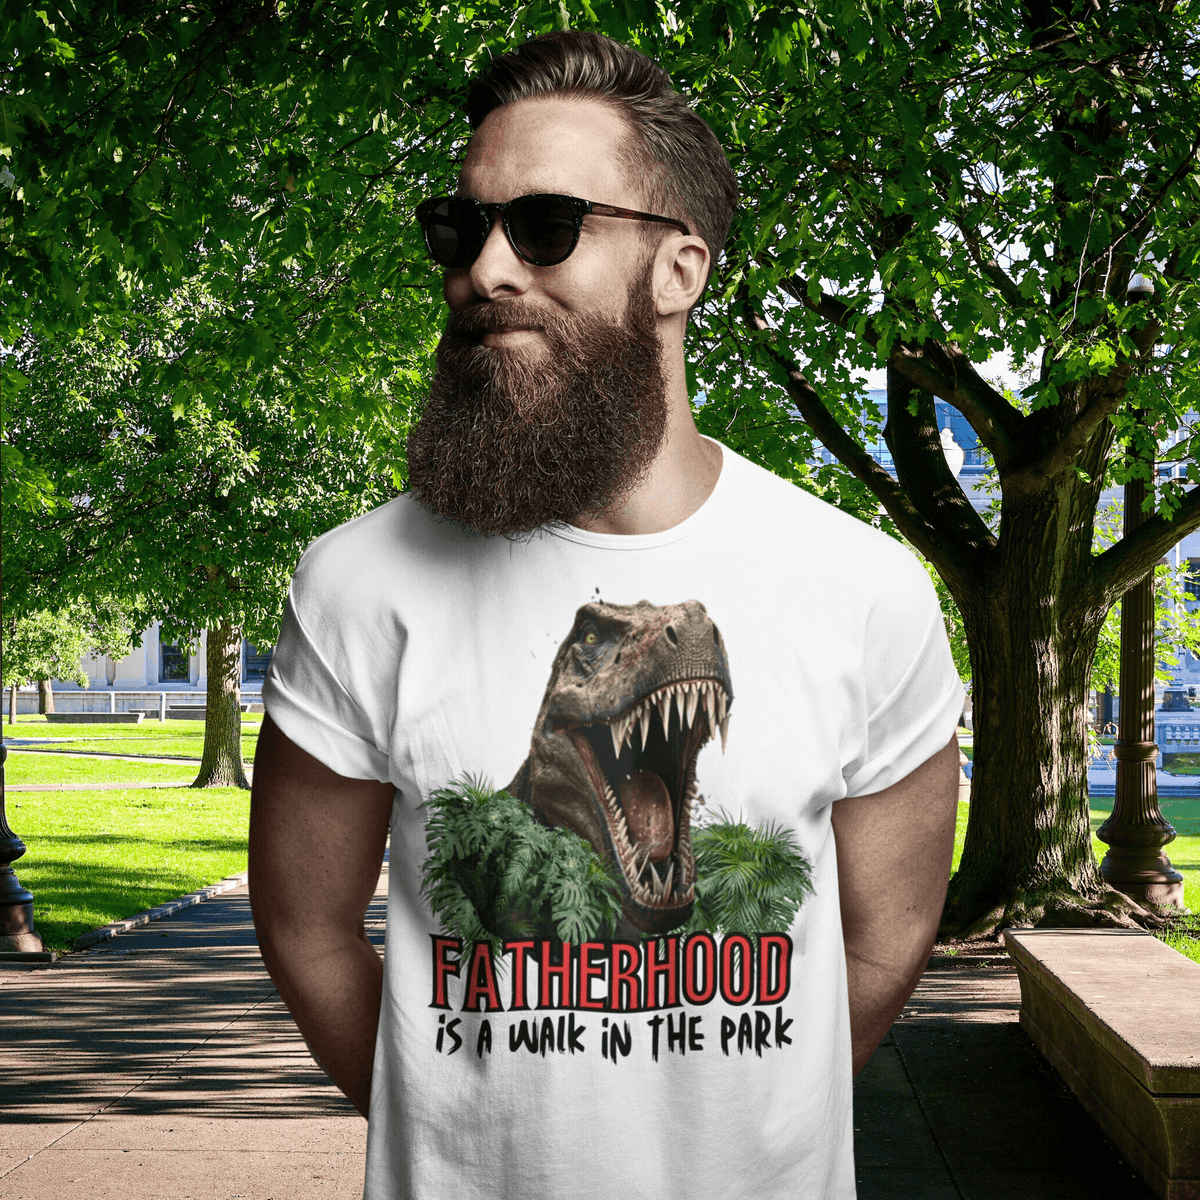 dinosaur, fatherhood, parenting, family, dad life, t-shirt, casual wear, graphic tee, father's day, gift for dad, comfortable, playful design, soft fabric, unique phrase, conversation starter, prehistoric, adventure, dad pride, comfort, stylish, fun, dad fashion, fatherhood is a walk in the park tee